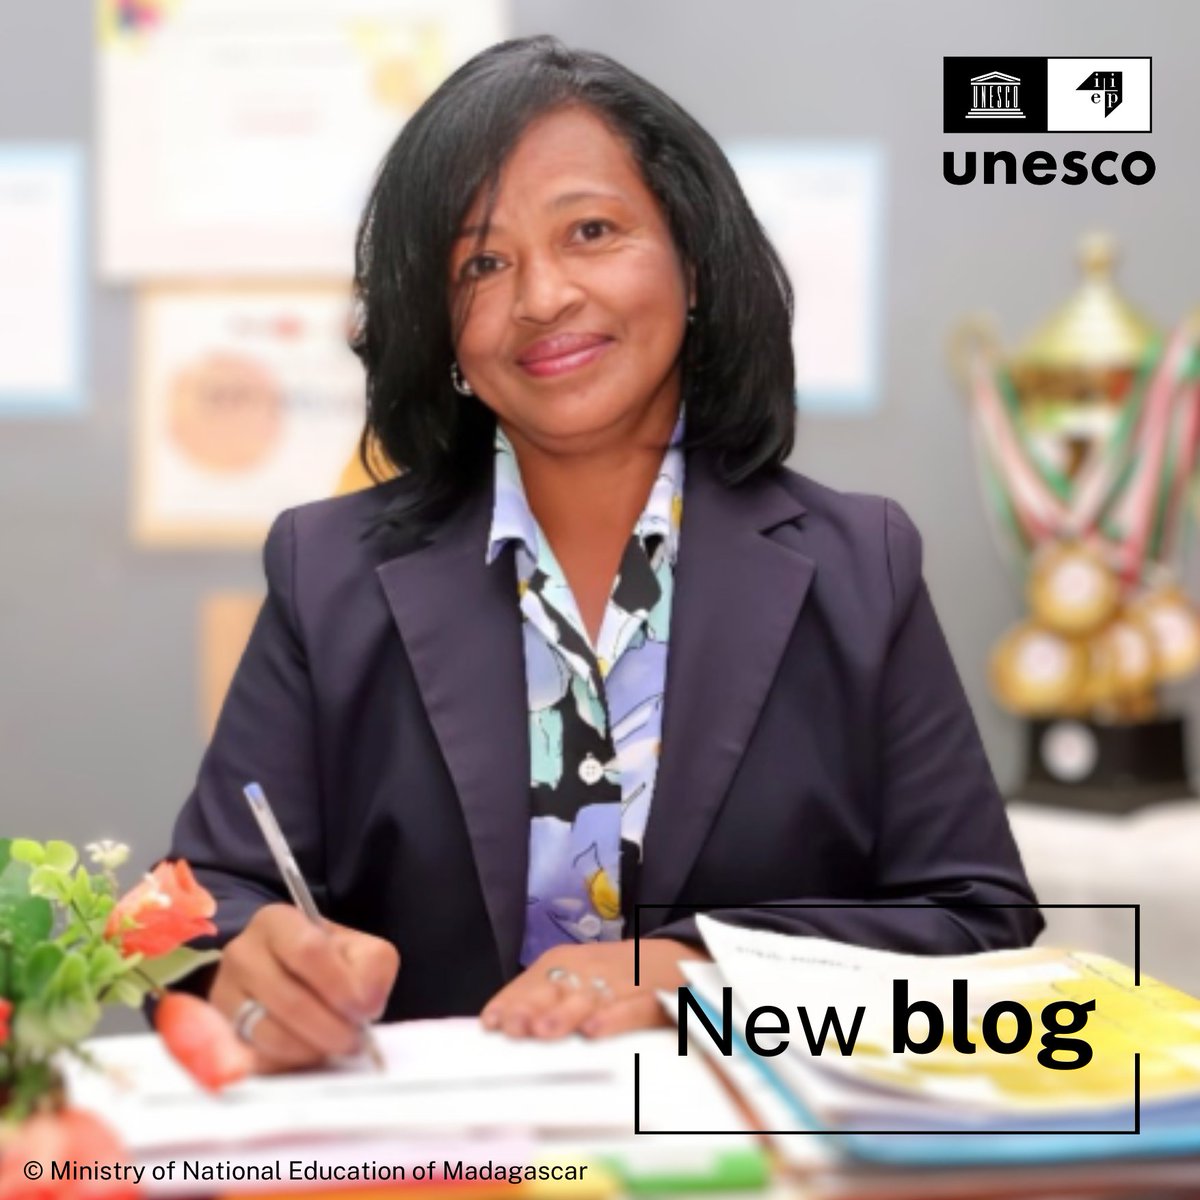 #Madagascar🇲🇬 has one of the highest proportions of women school leaders in sub-Saharan Africa♀️ Their presence has improved learning outcomes for children, including fewer dropouts📉 Learn more in this 🆕 @GPforEducation blog by IIEP experts: bit.ly/4aLIg3c